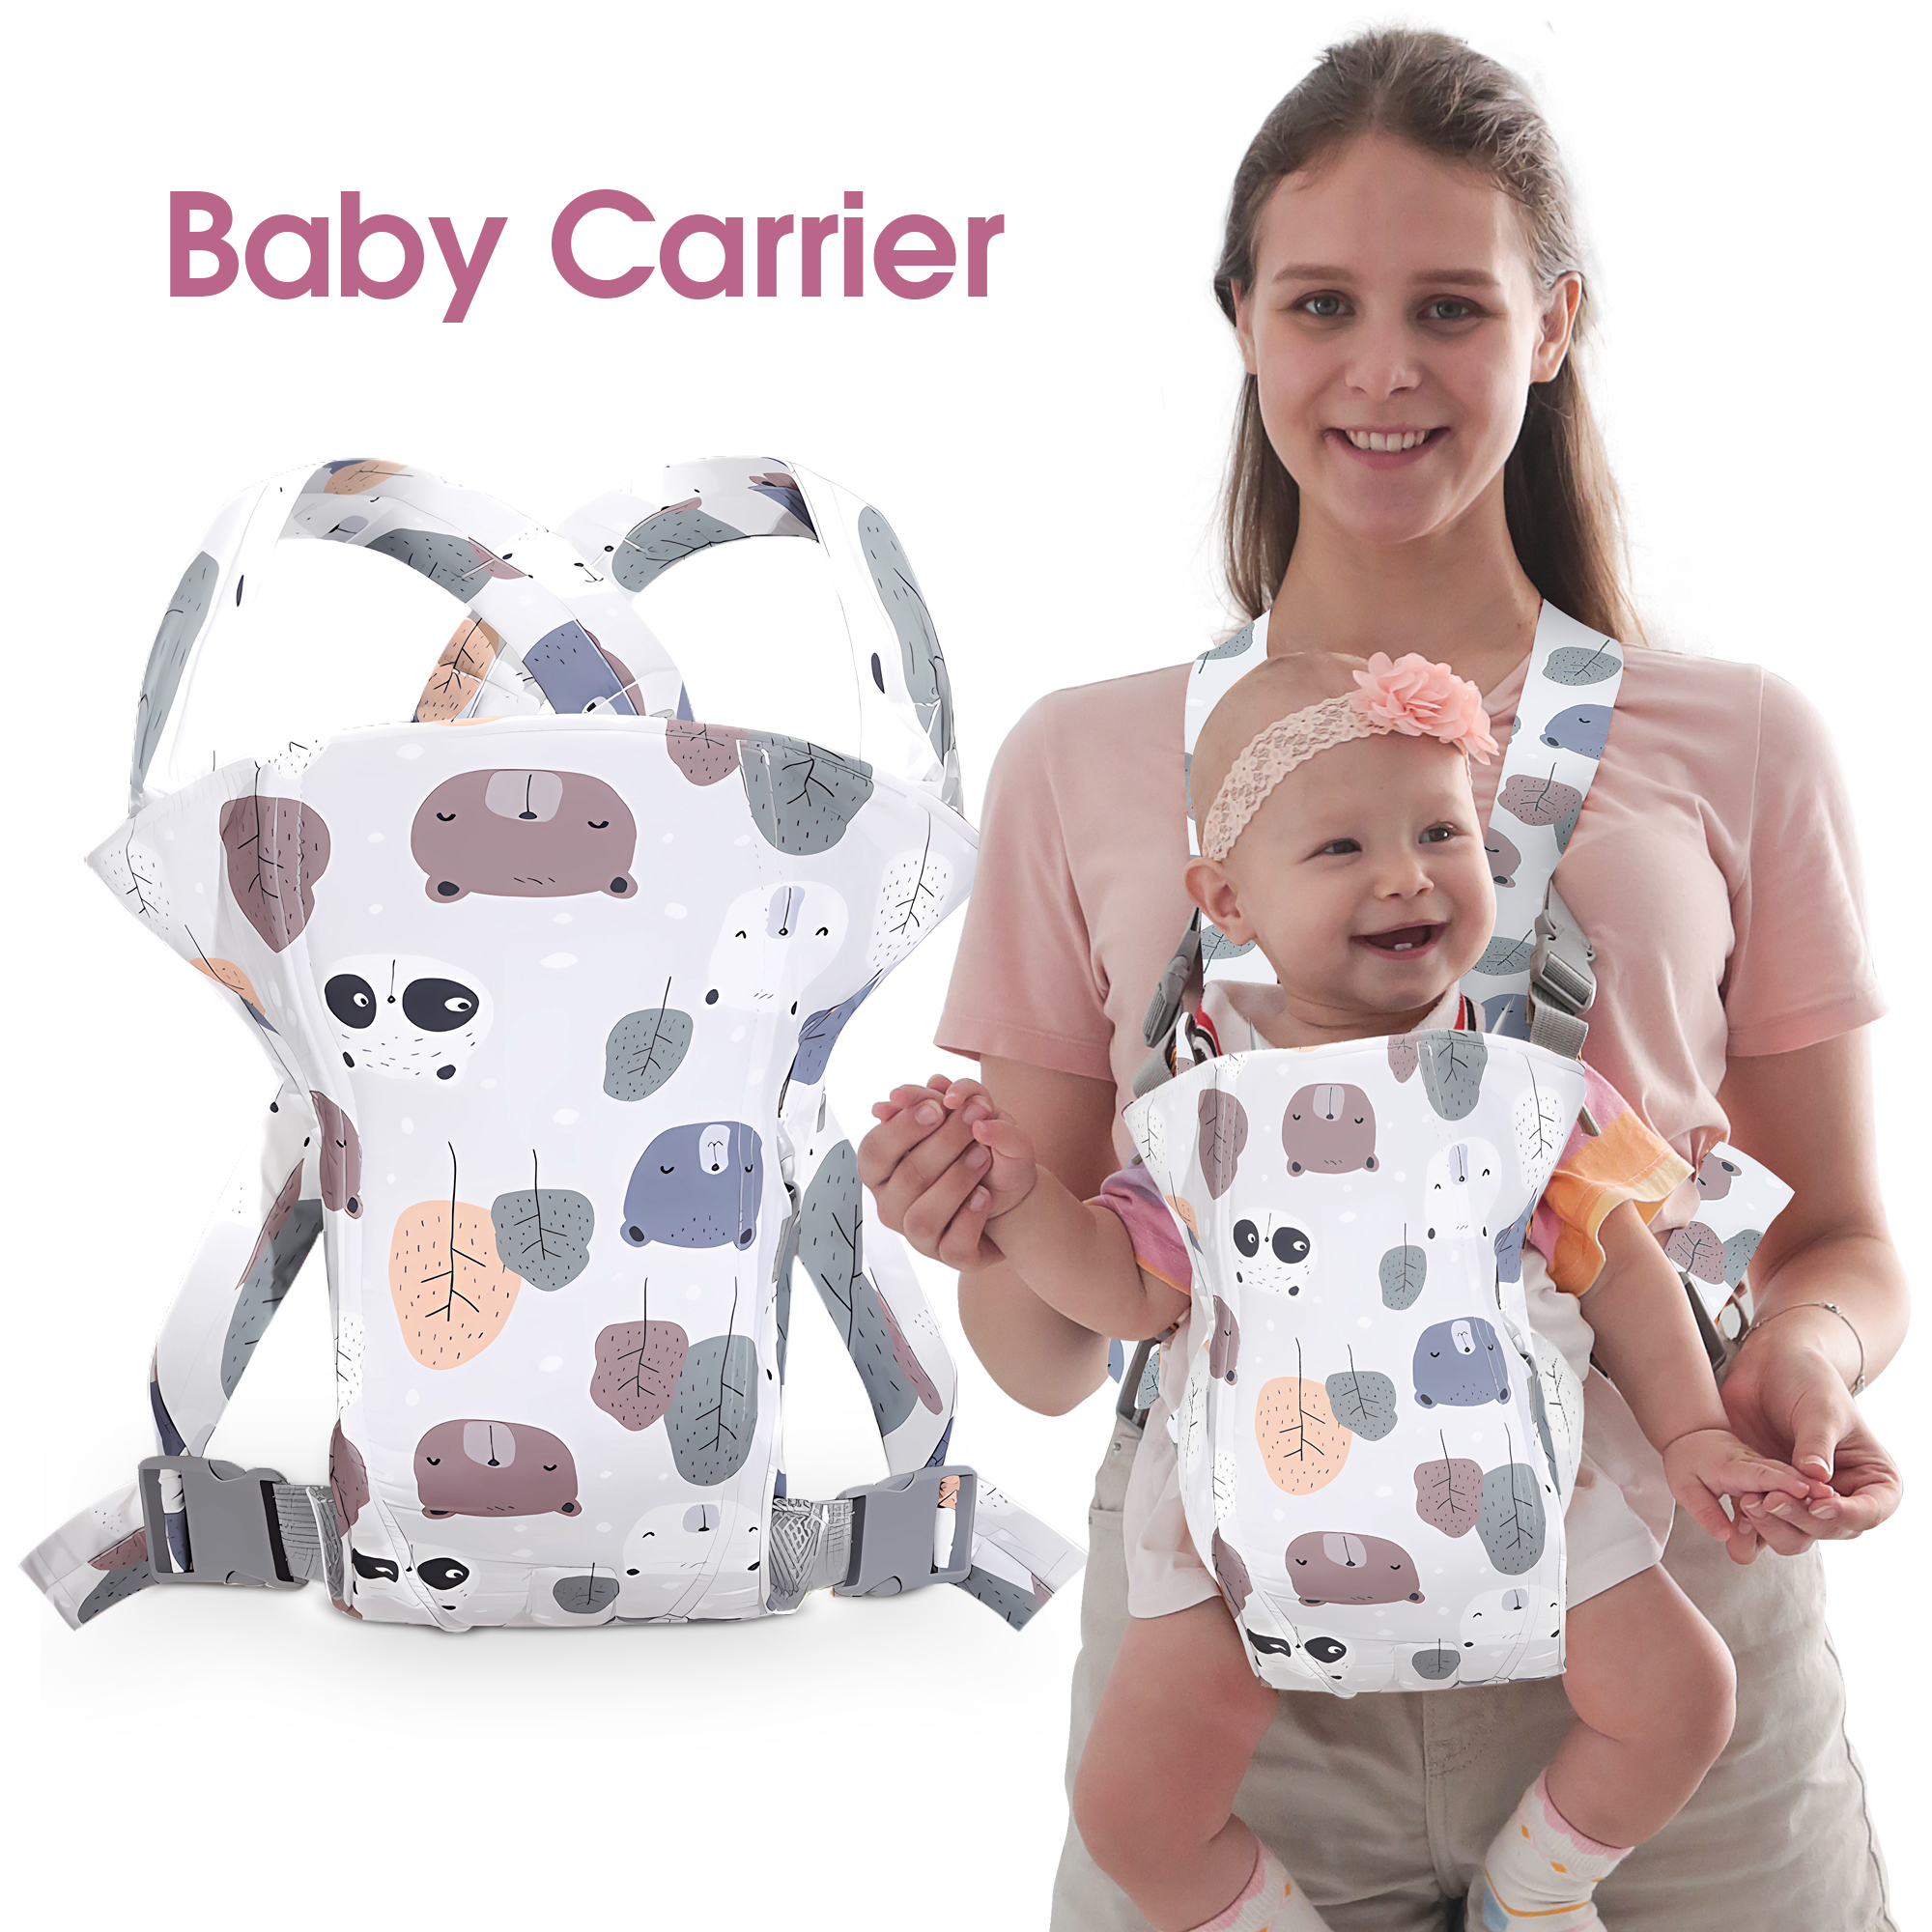 4 in 1 Baby Carrier, Infant Wraps Carrier Ergonomic Baby Carrier Backpack, Newborn Carrier for Baby Carrier Newborn to Toddler, Colorful - image 1 of 8